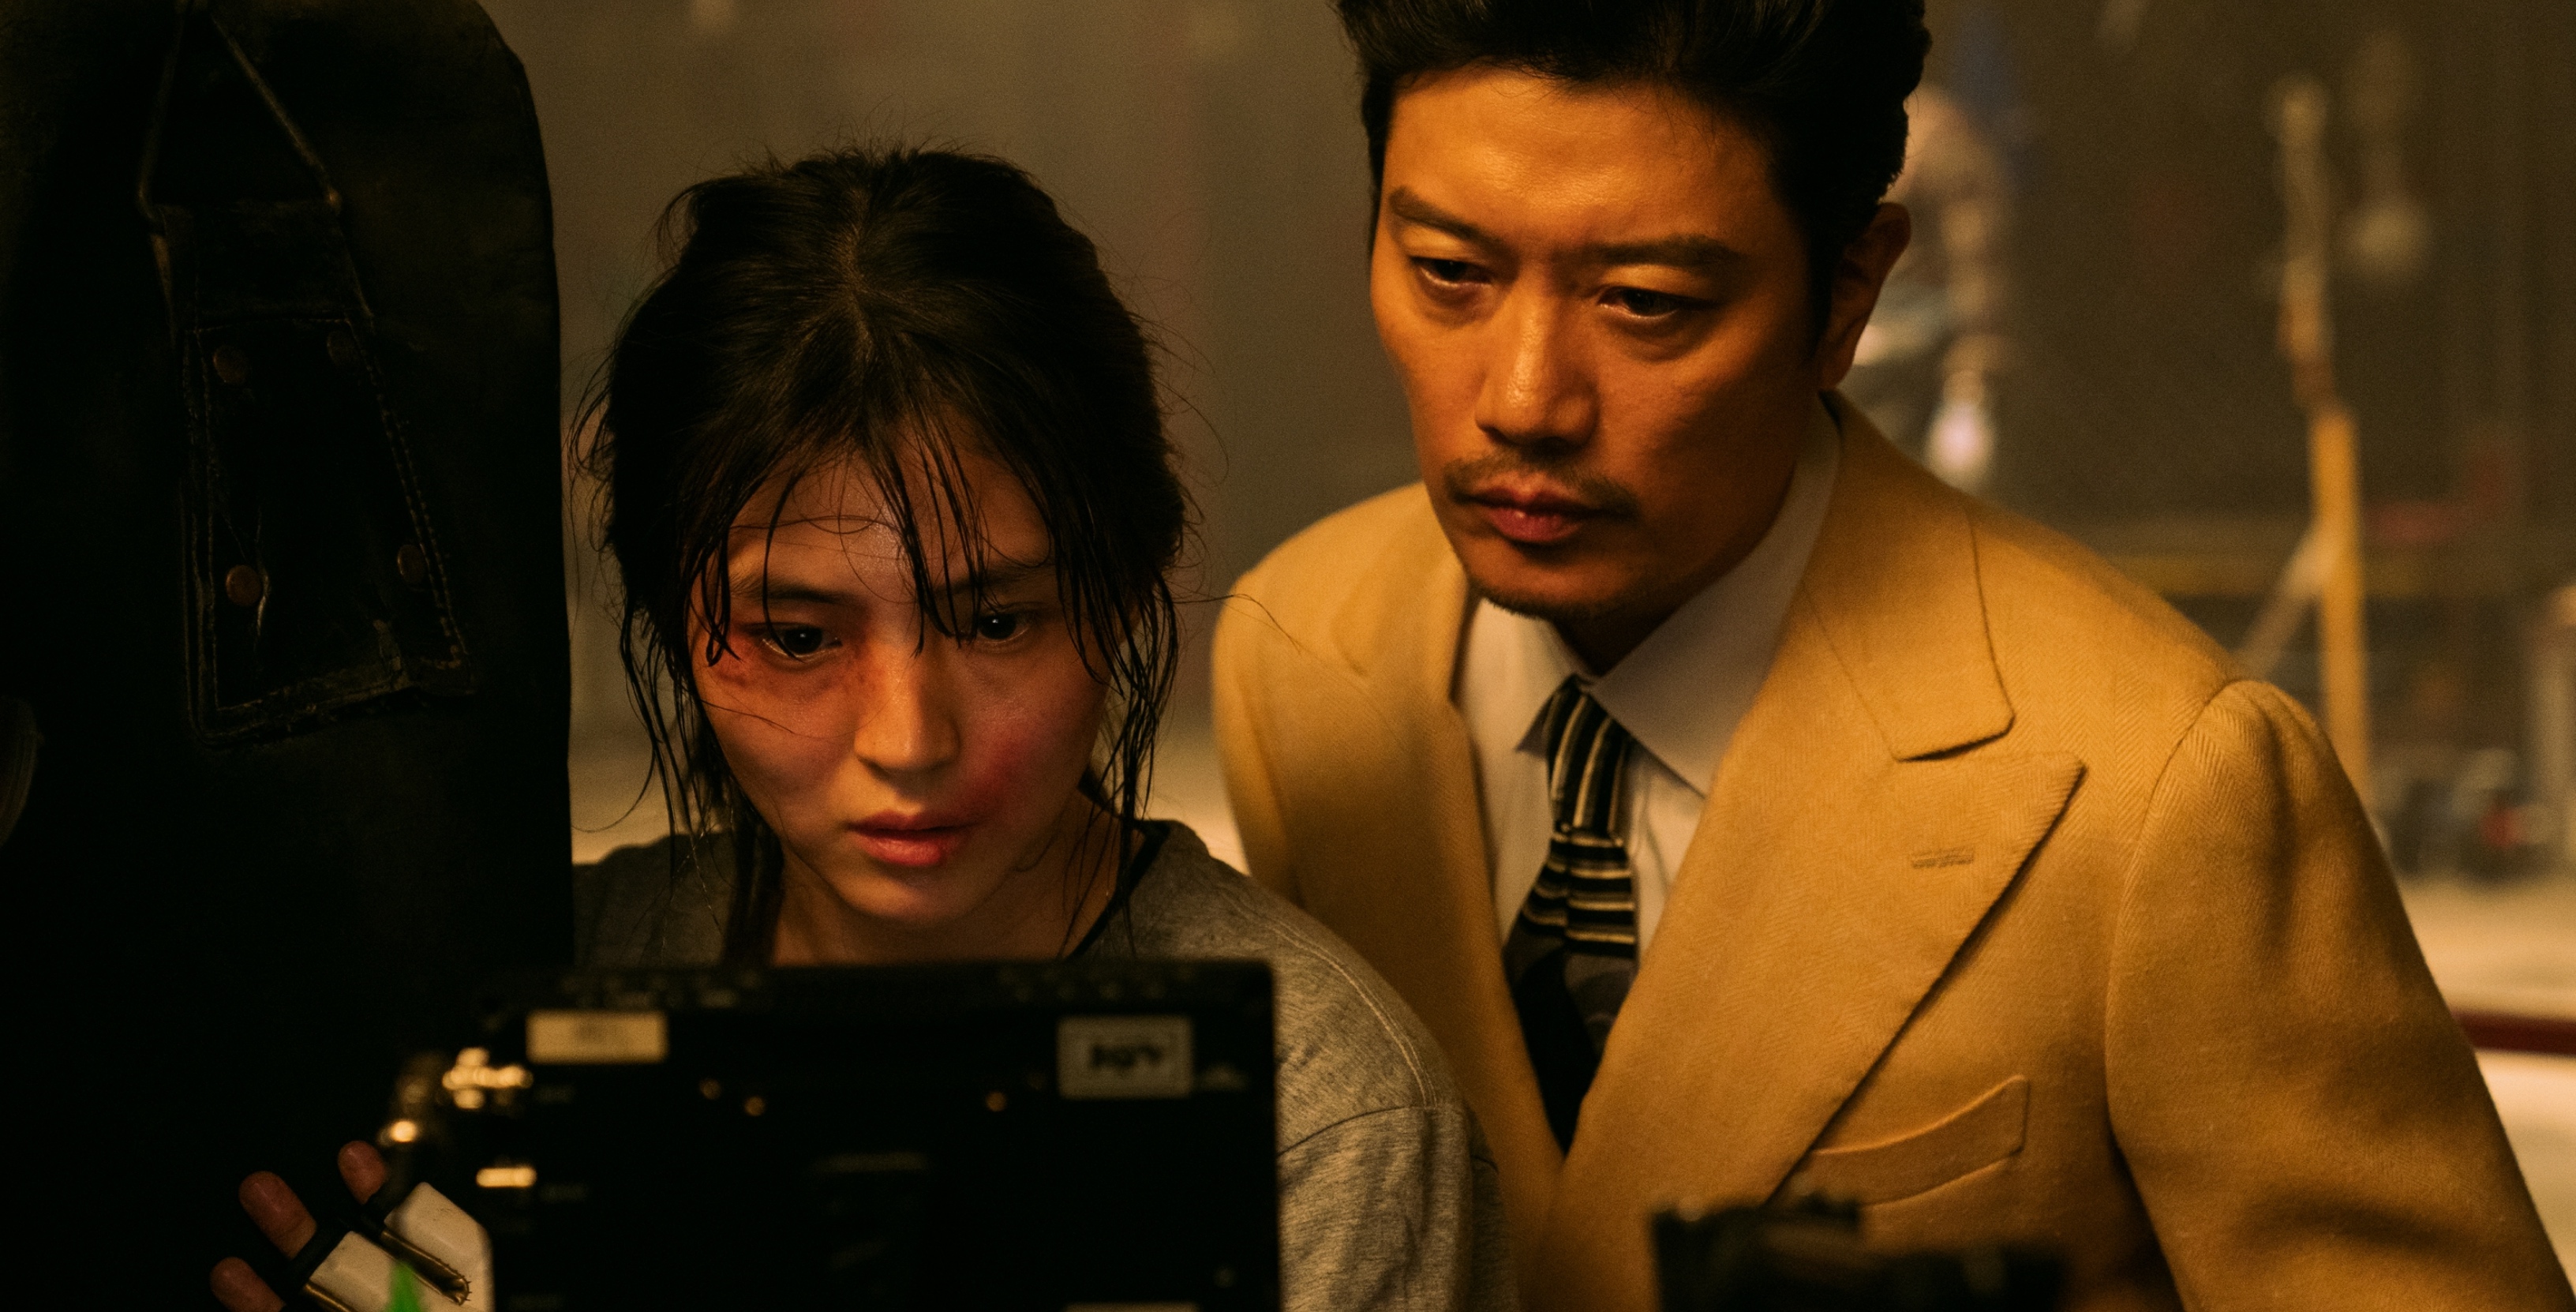 Actors Han So-Hee and Park Hie-soon behind the scenes of 'My Name' looking at monitor